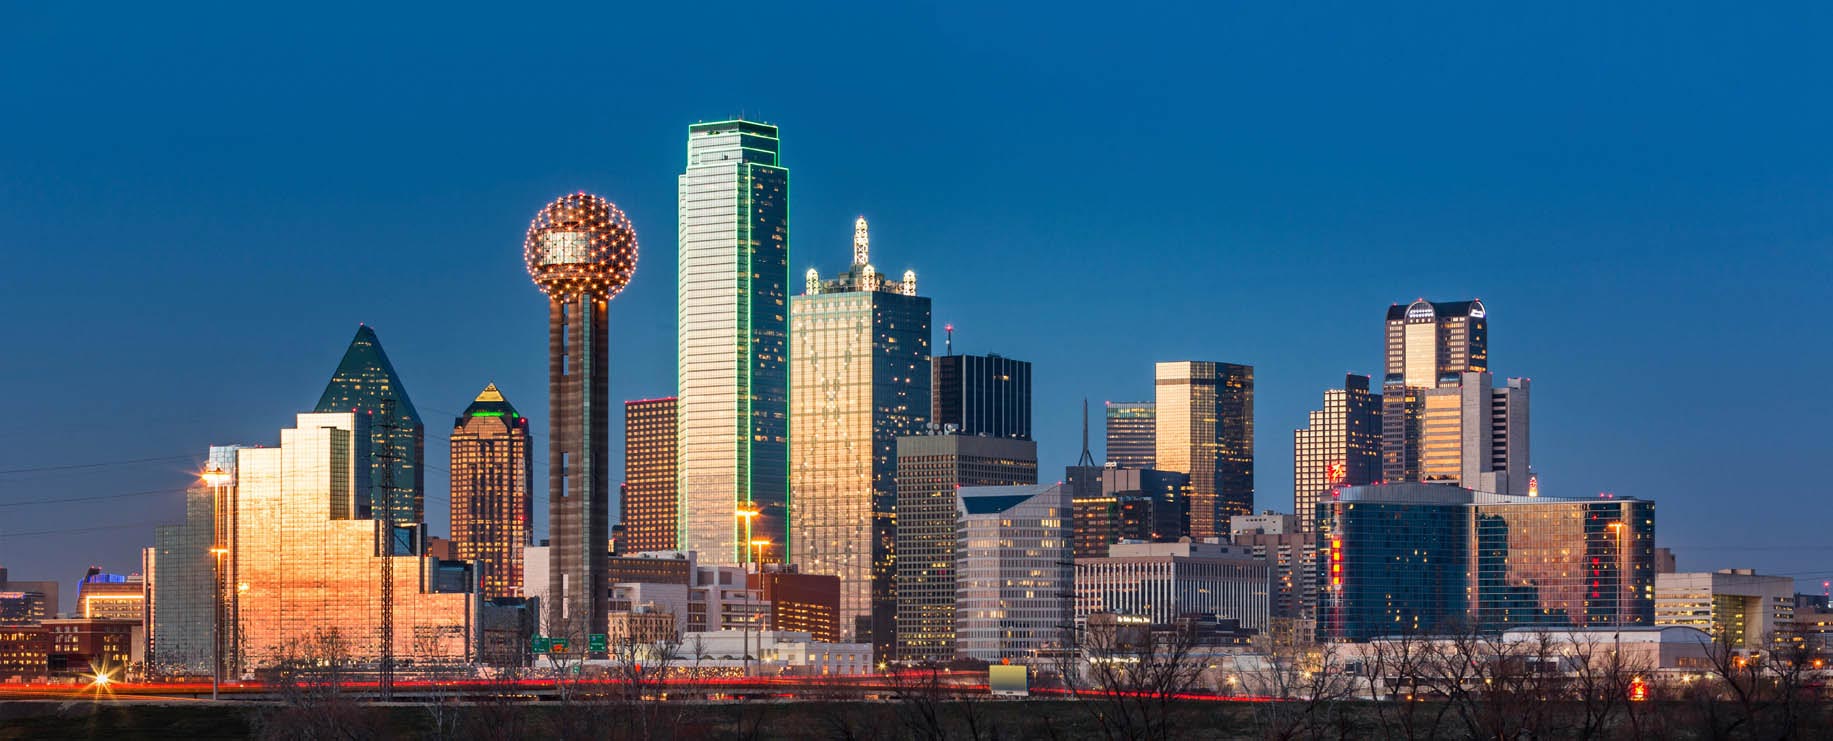 Images of Dallas | 1833x741